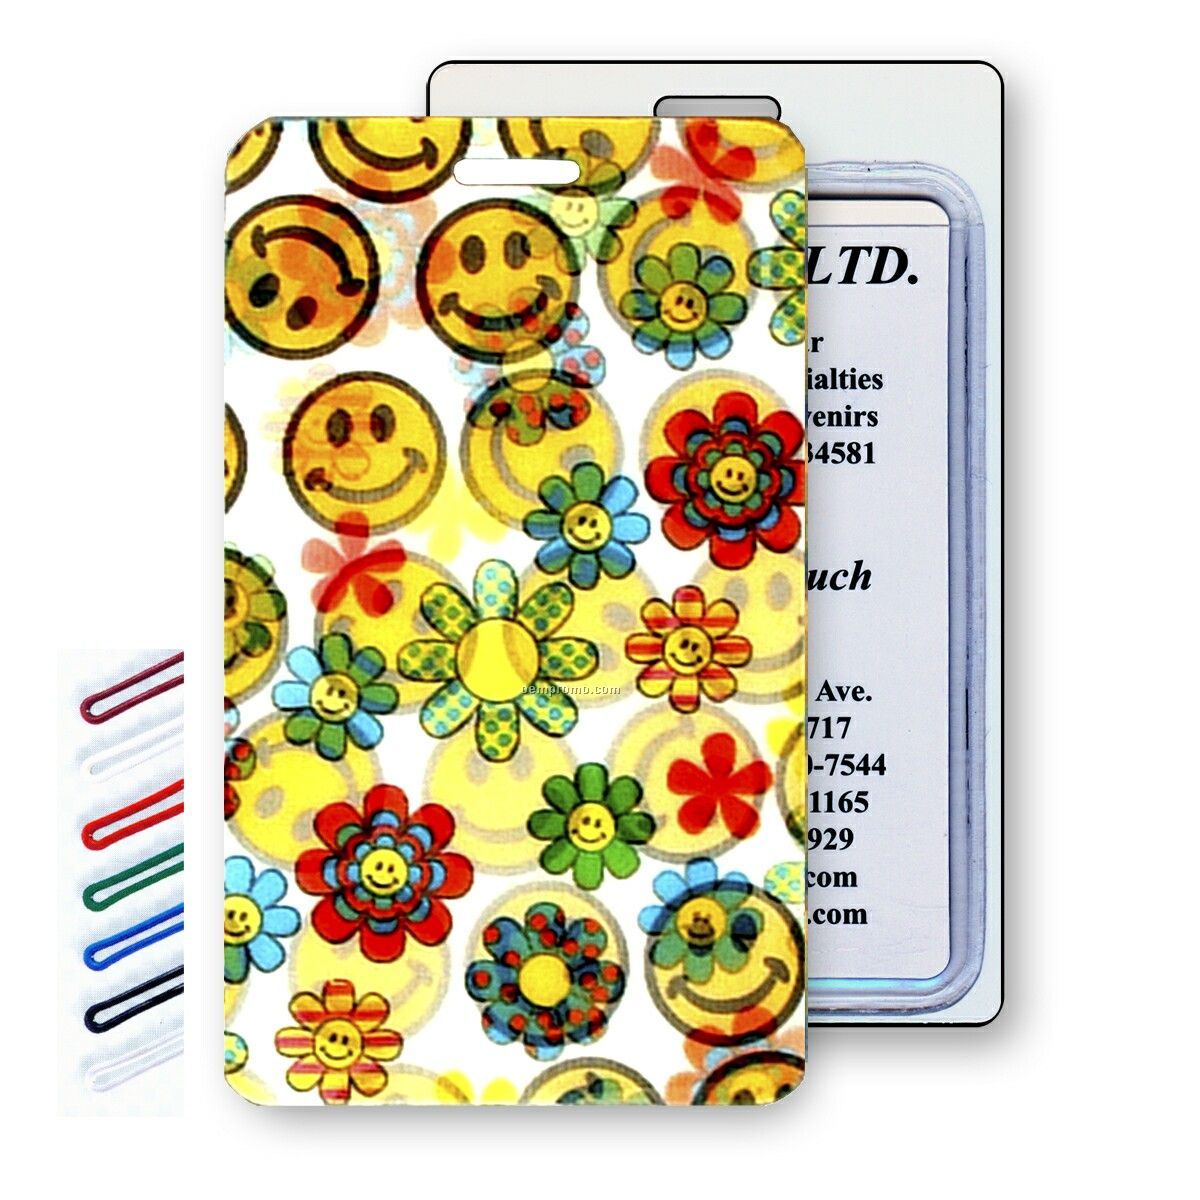 Lenticular Luggage Tags (Stock) Flip Smiley Faces & Flowers